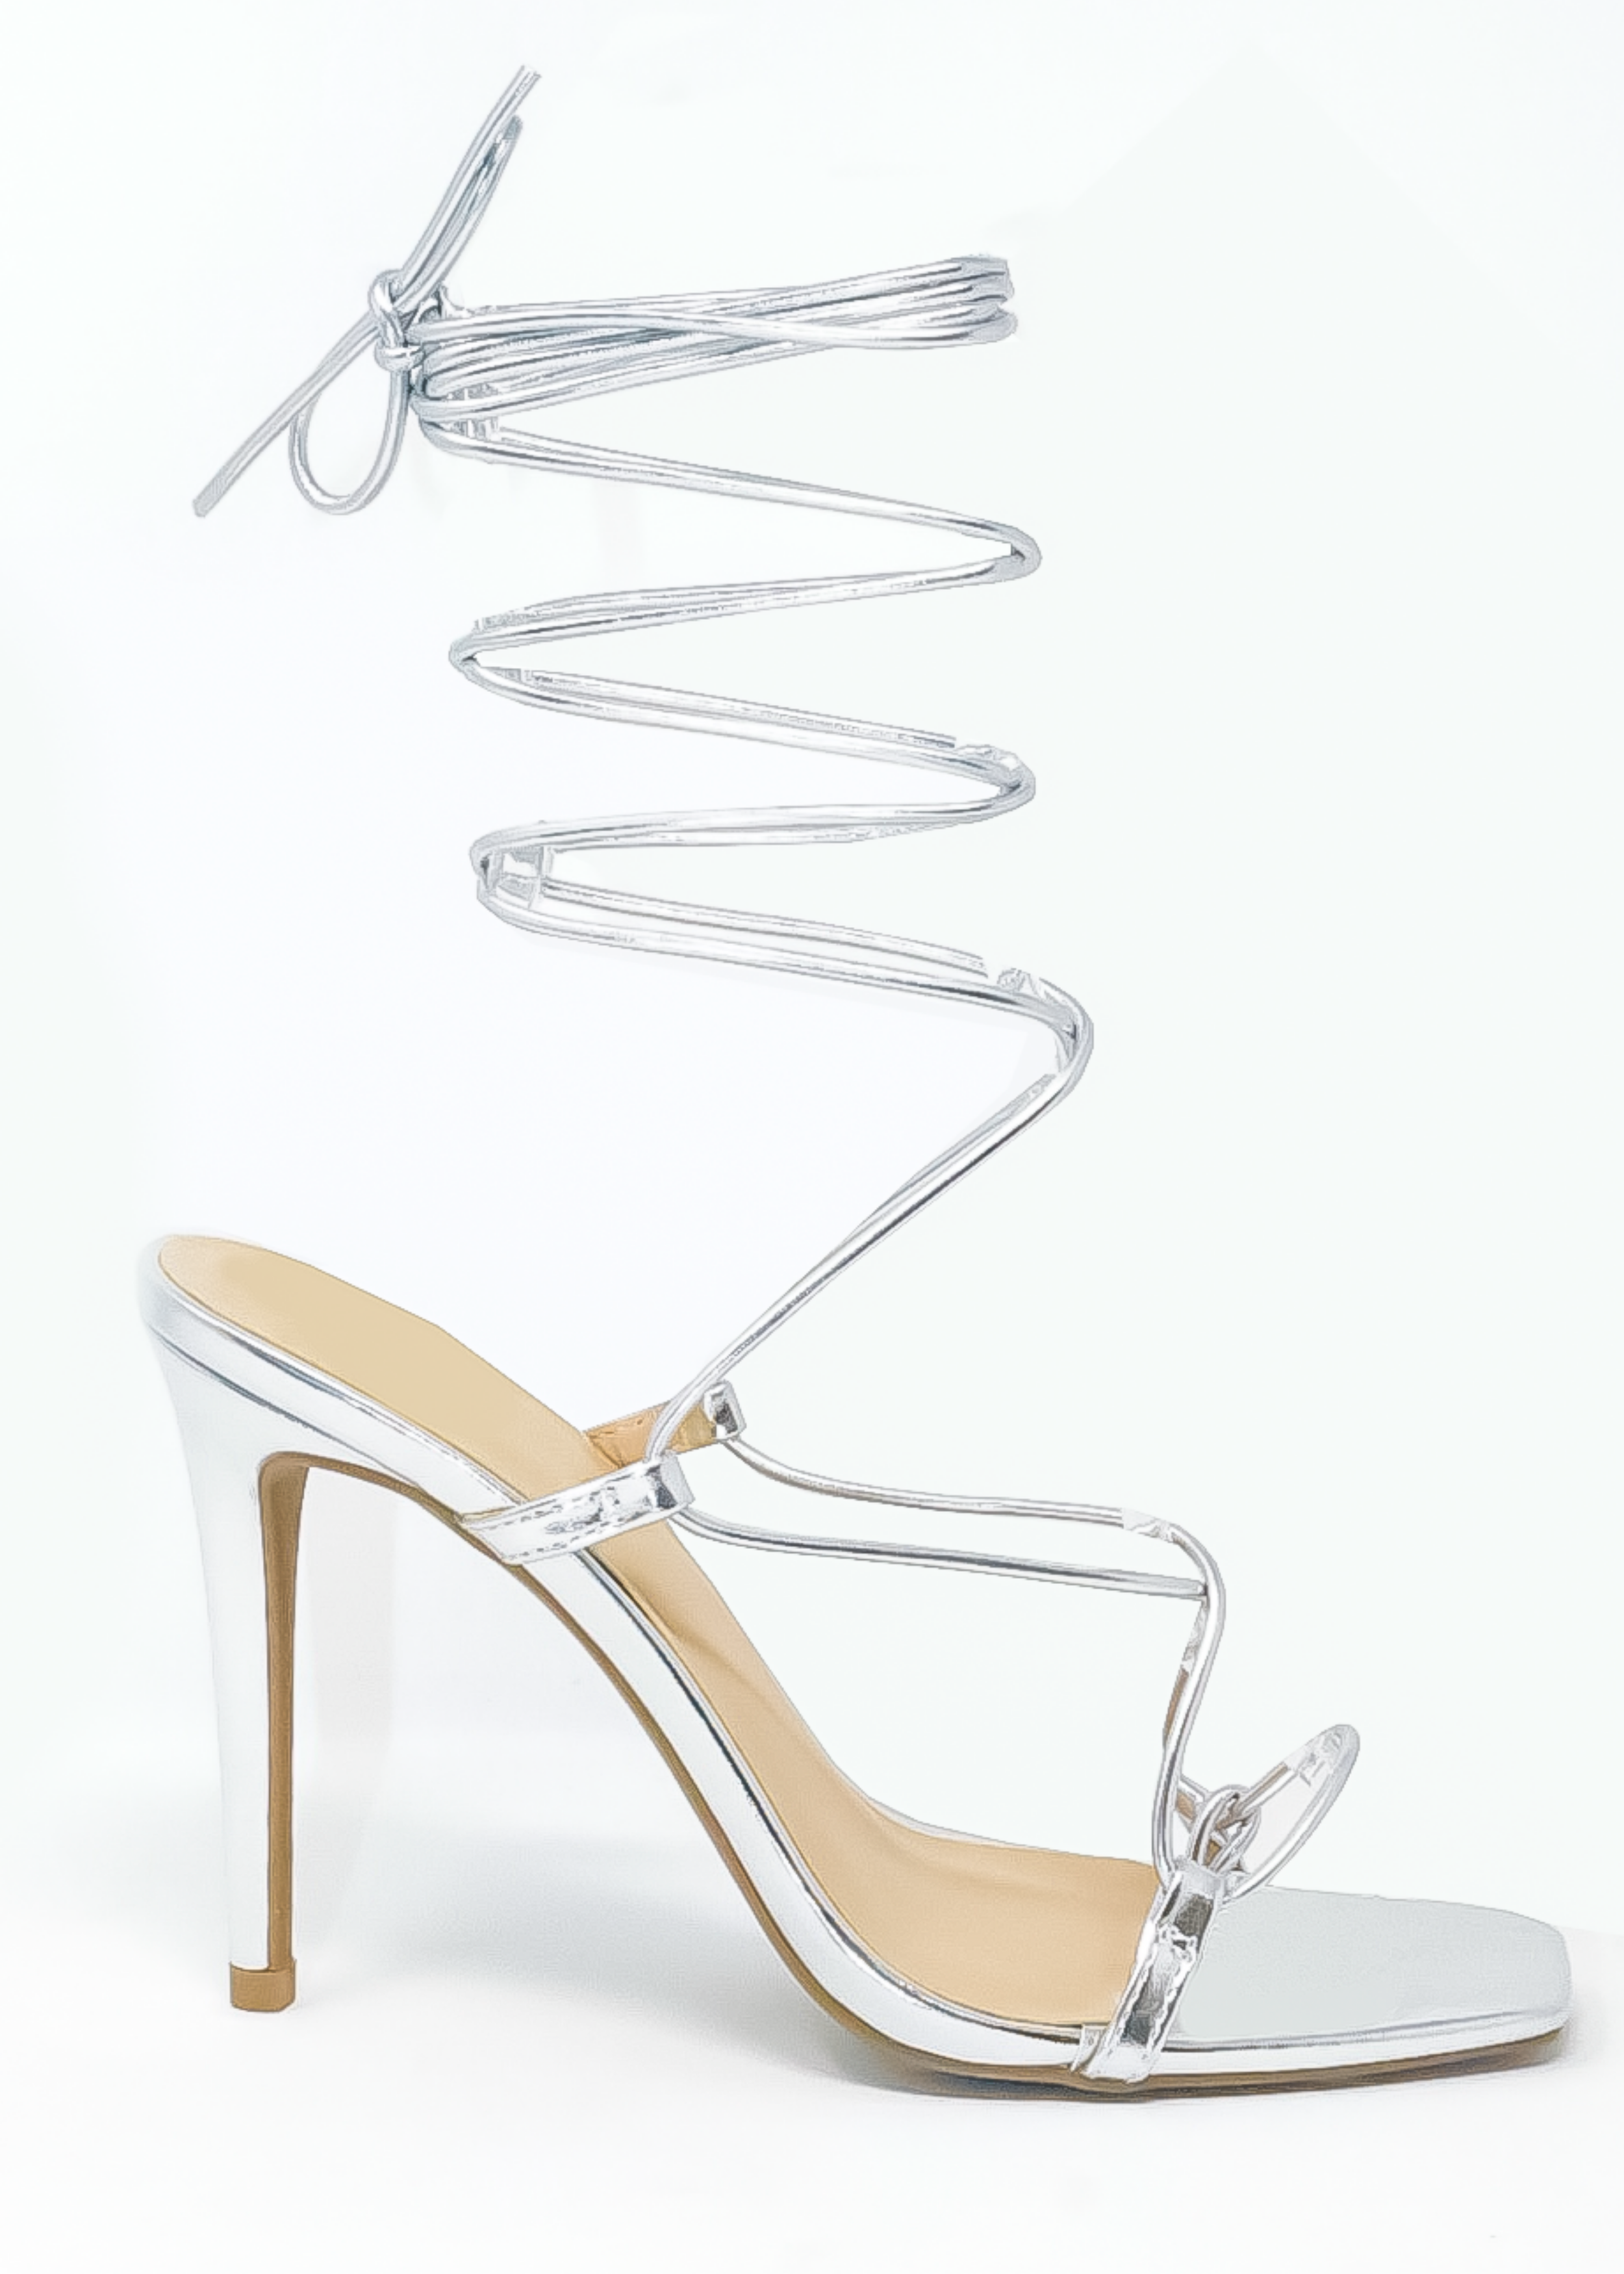 Women's Ana silver lace tie up heel sandals for night out.